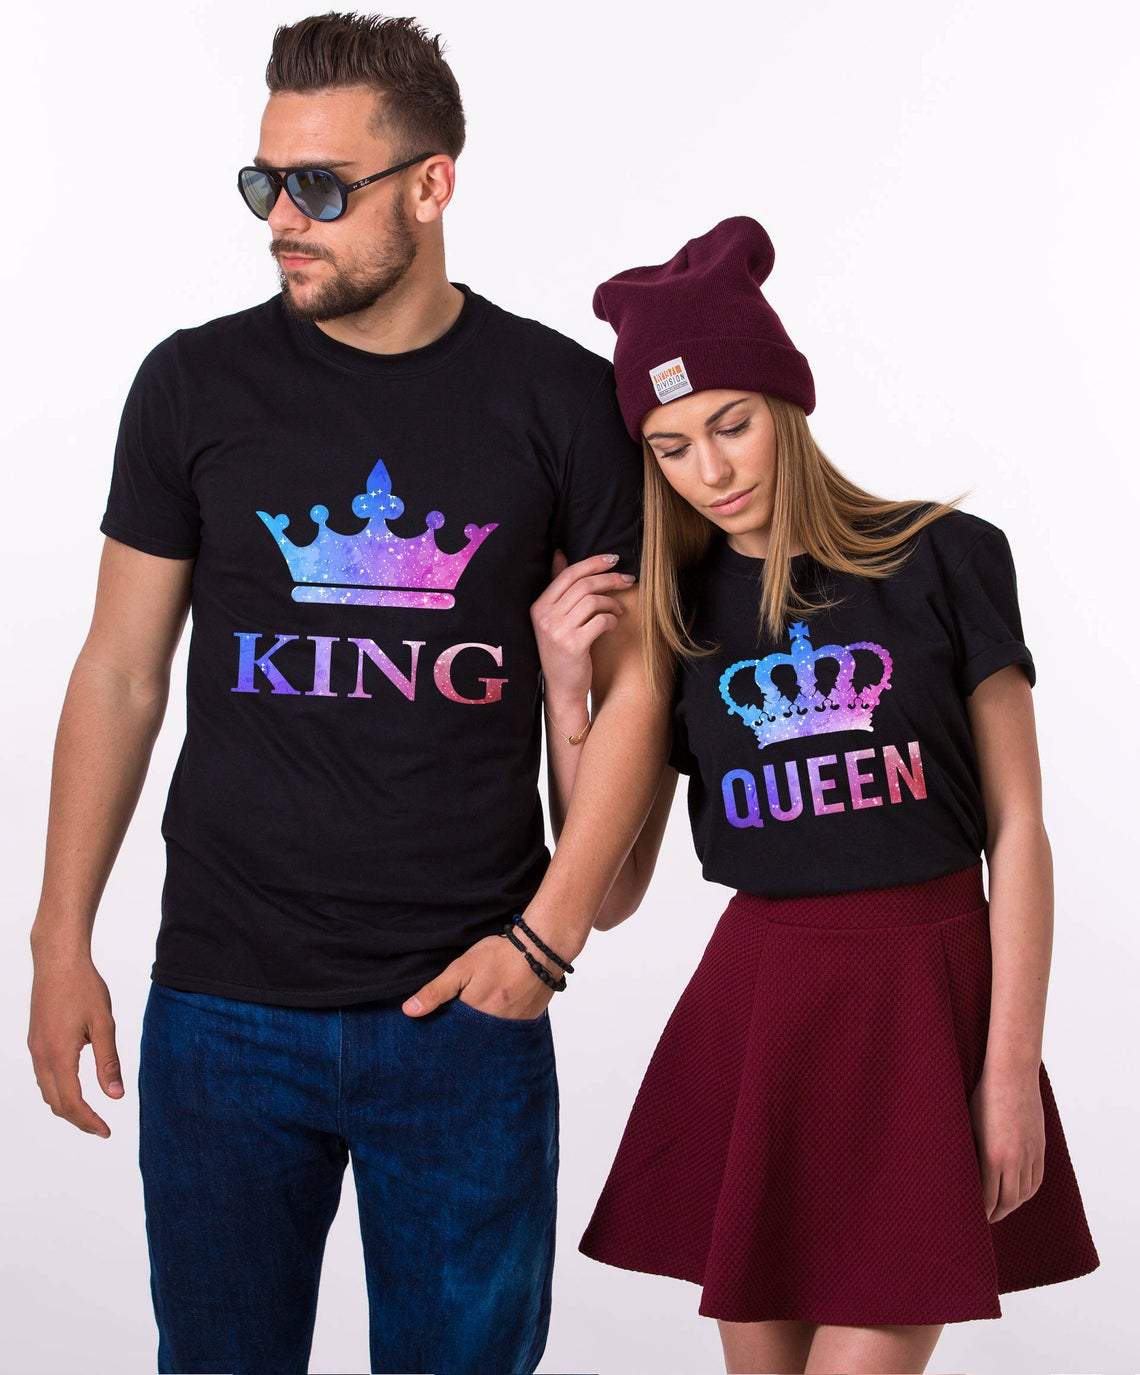 King Queen Galaxy Shirts For Matching Couple His Her Gift T-Shirt